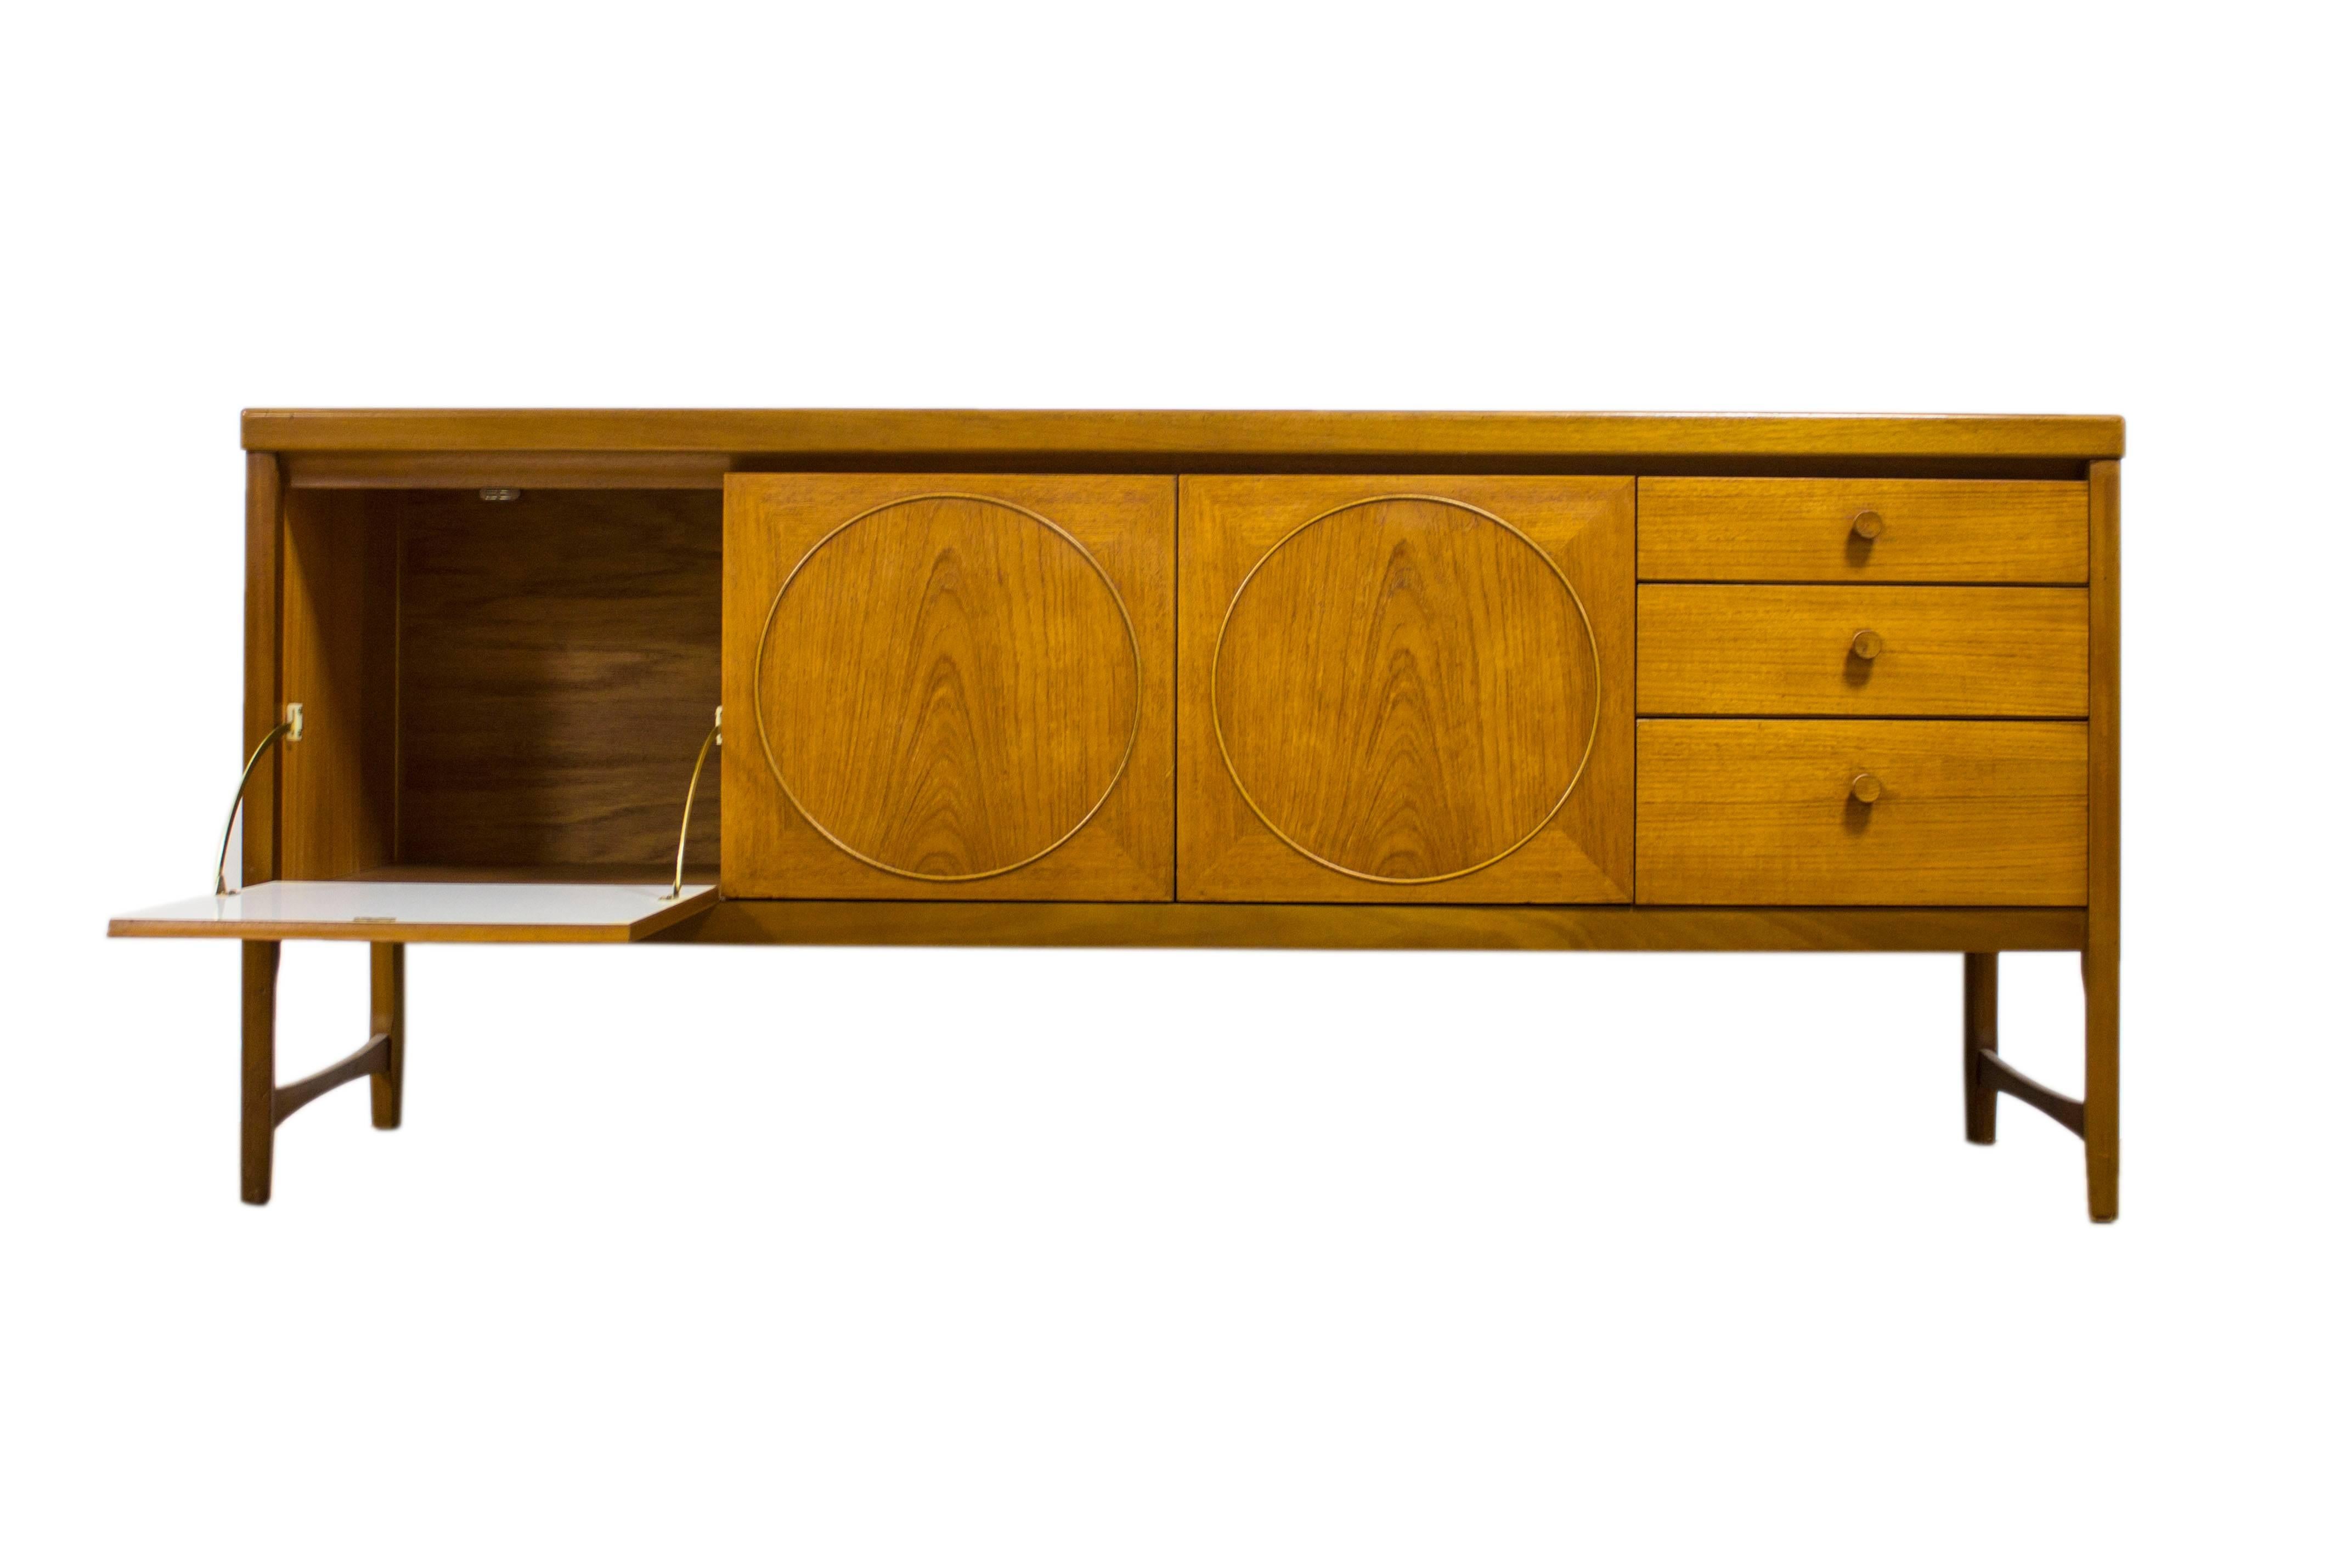 Nathan furniture have always had an eye for design and style and from a very early stage, they made themselves one of the market leaders for stylish and practical furniture.

This stunning Nathan “Circles” teak sideboard is a great storage piece